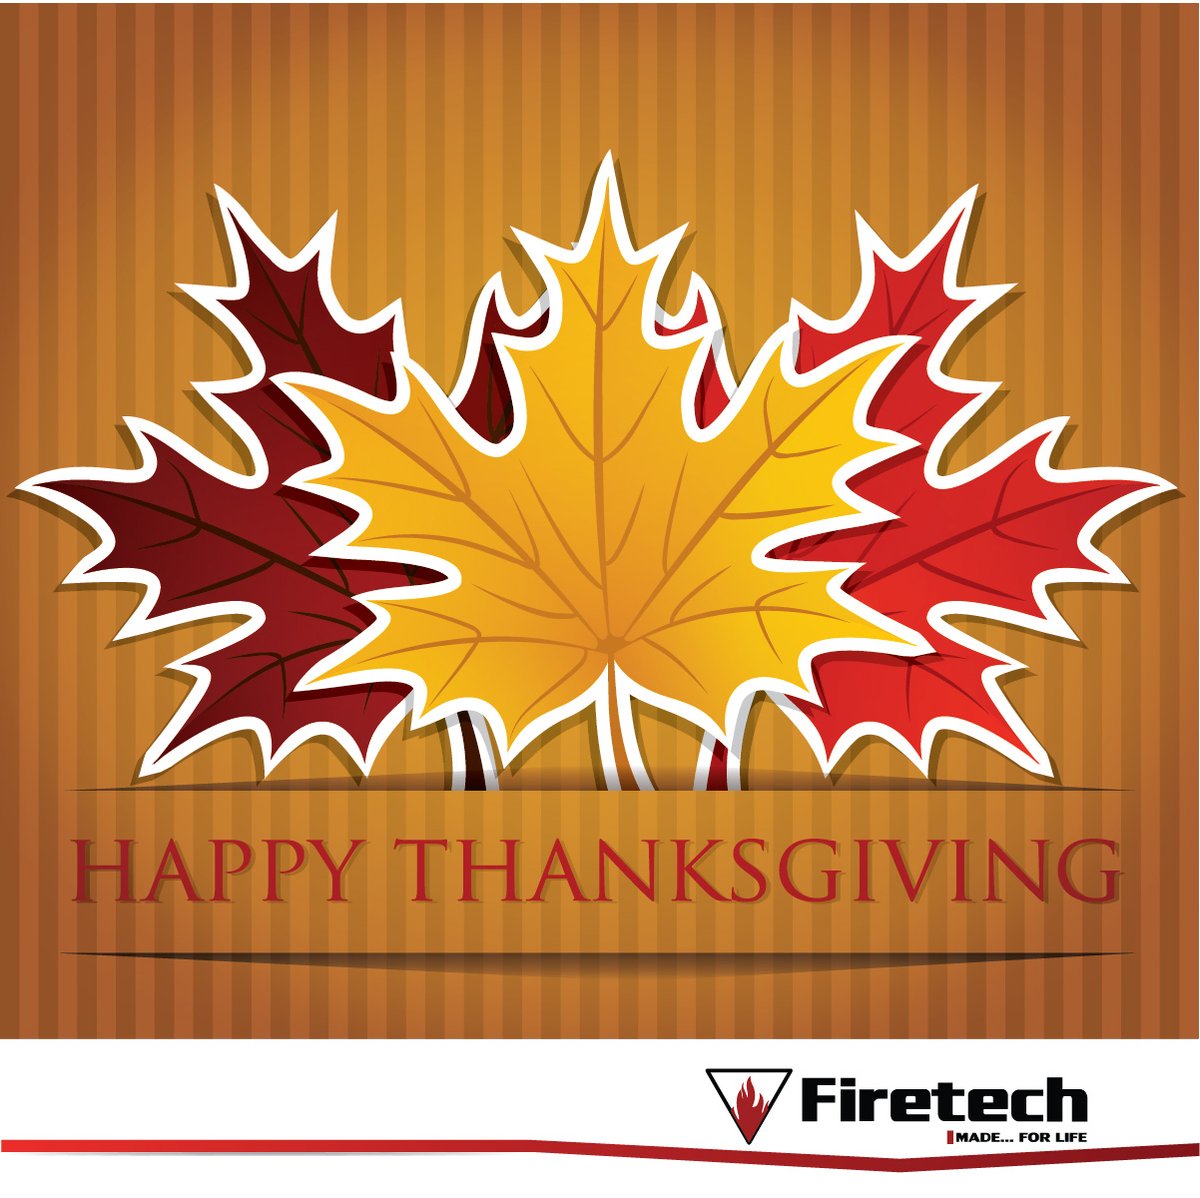 Happy Thanksgiving Canada! 🍁🦃
#Thanksgiving #HappyThanksgiving2020 #happythanksgivng #firetechmfg #madeinbc #madeincanada #surreymakesppe #EMS #canadianmanufacturer #custommanufacturing #PPE